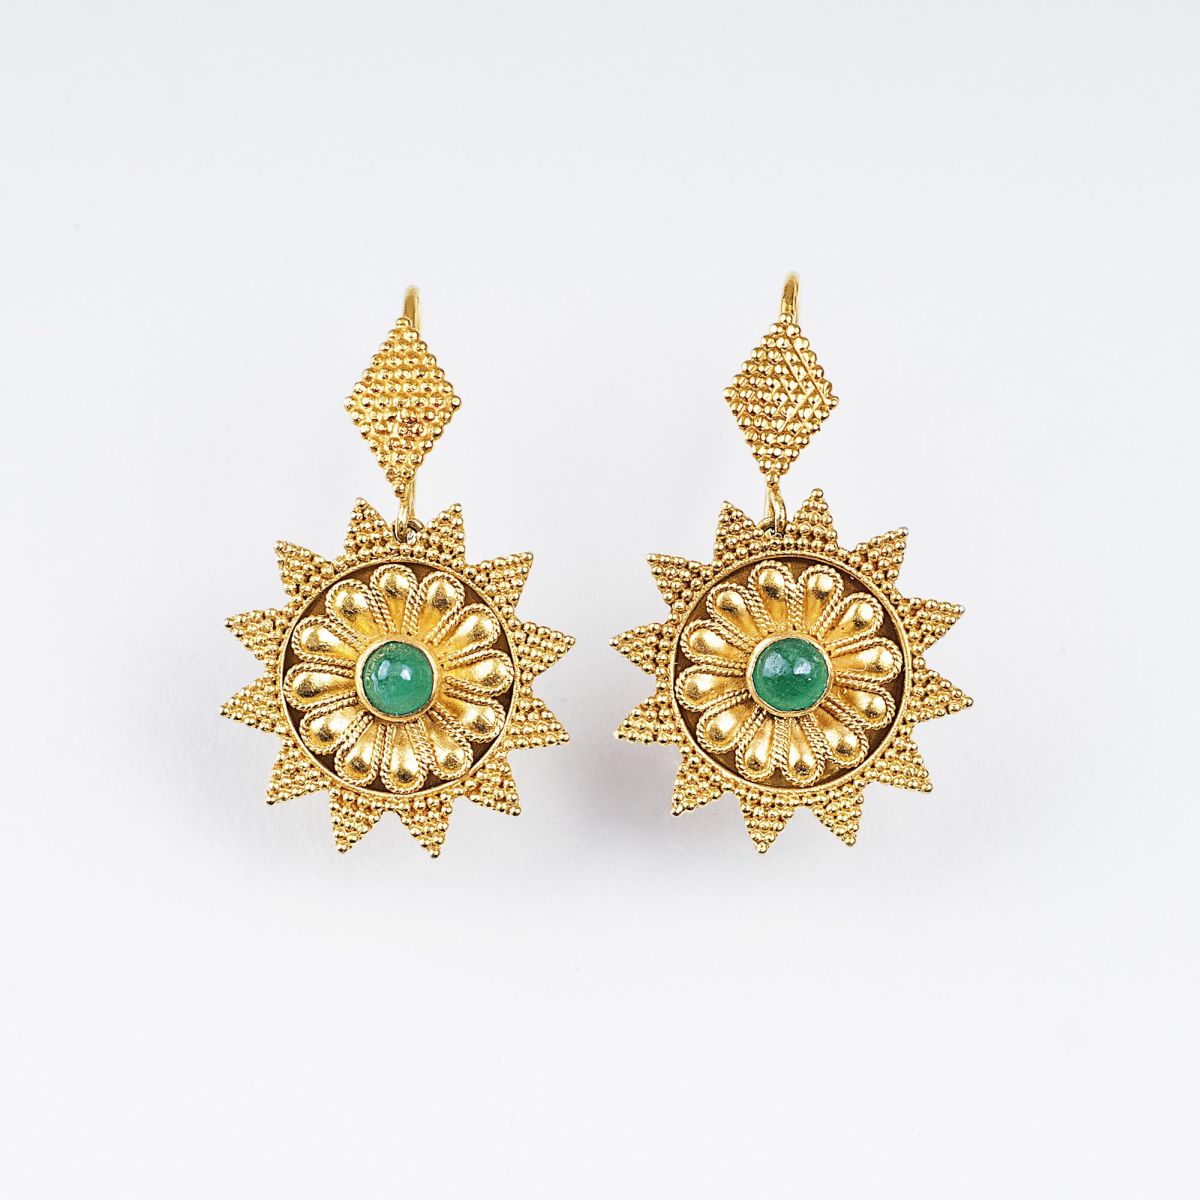 A Pair of Gold Earpendants with Emeralds